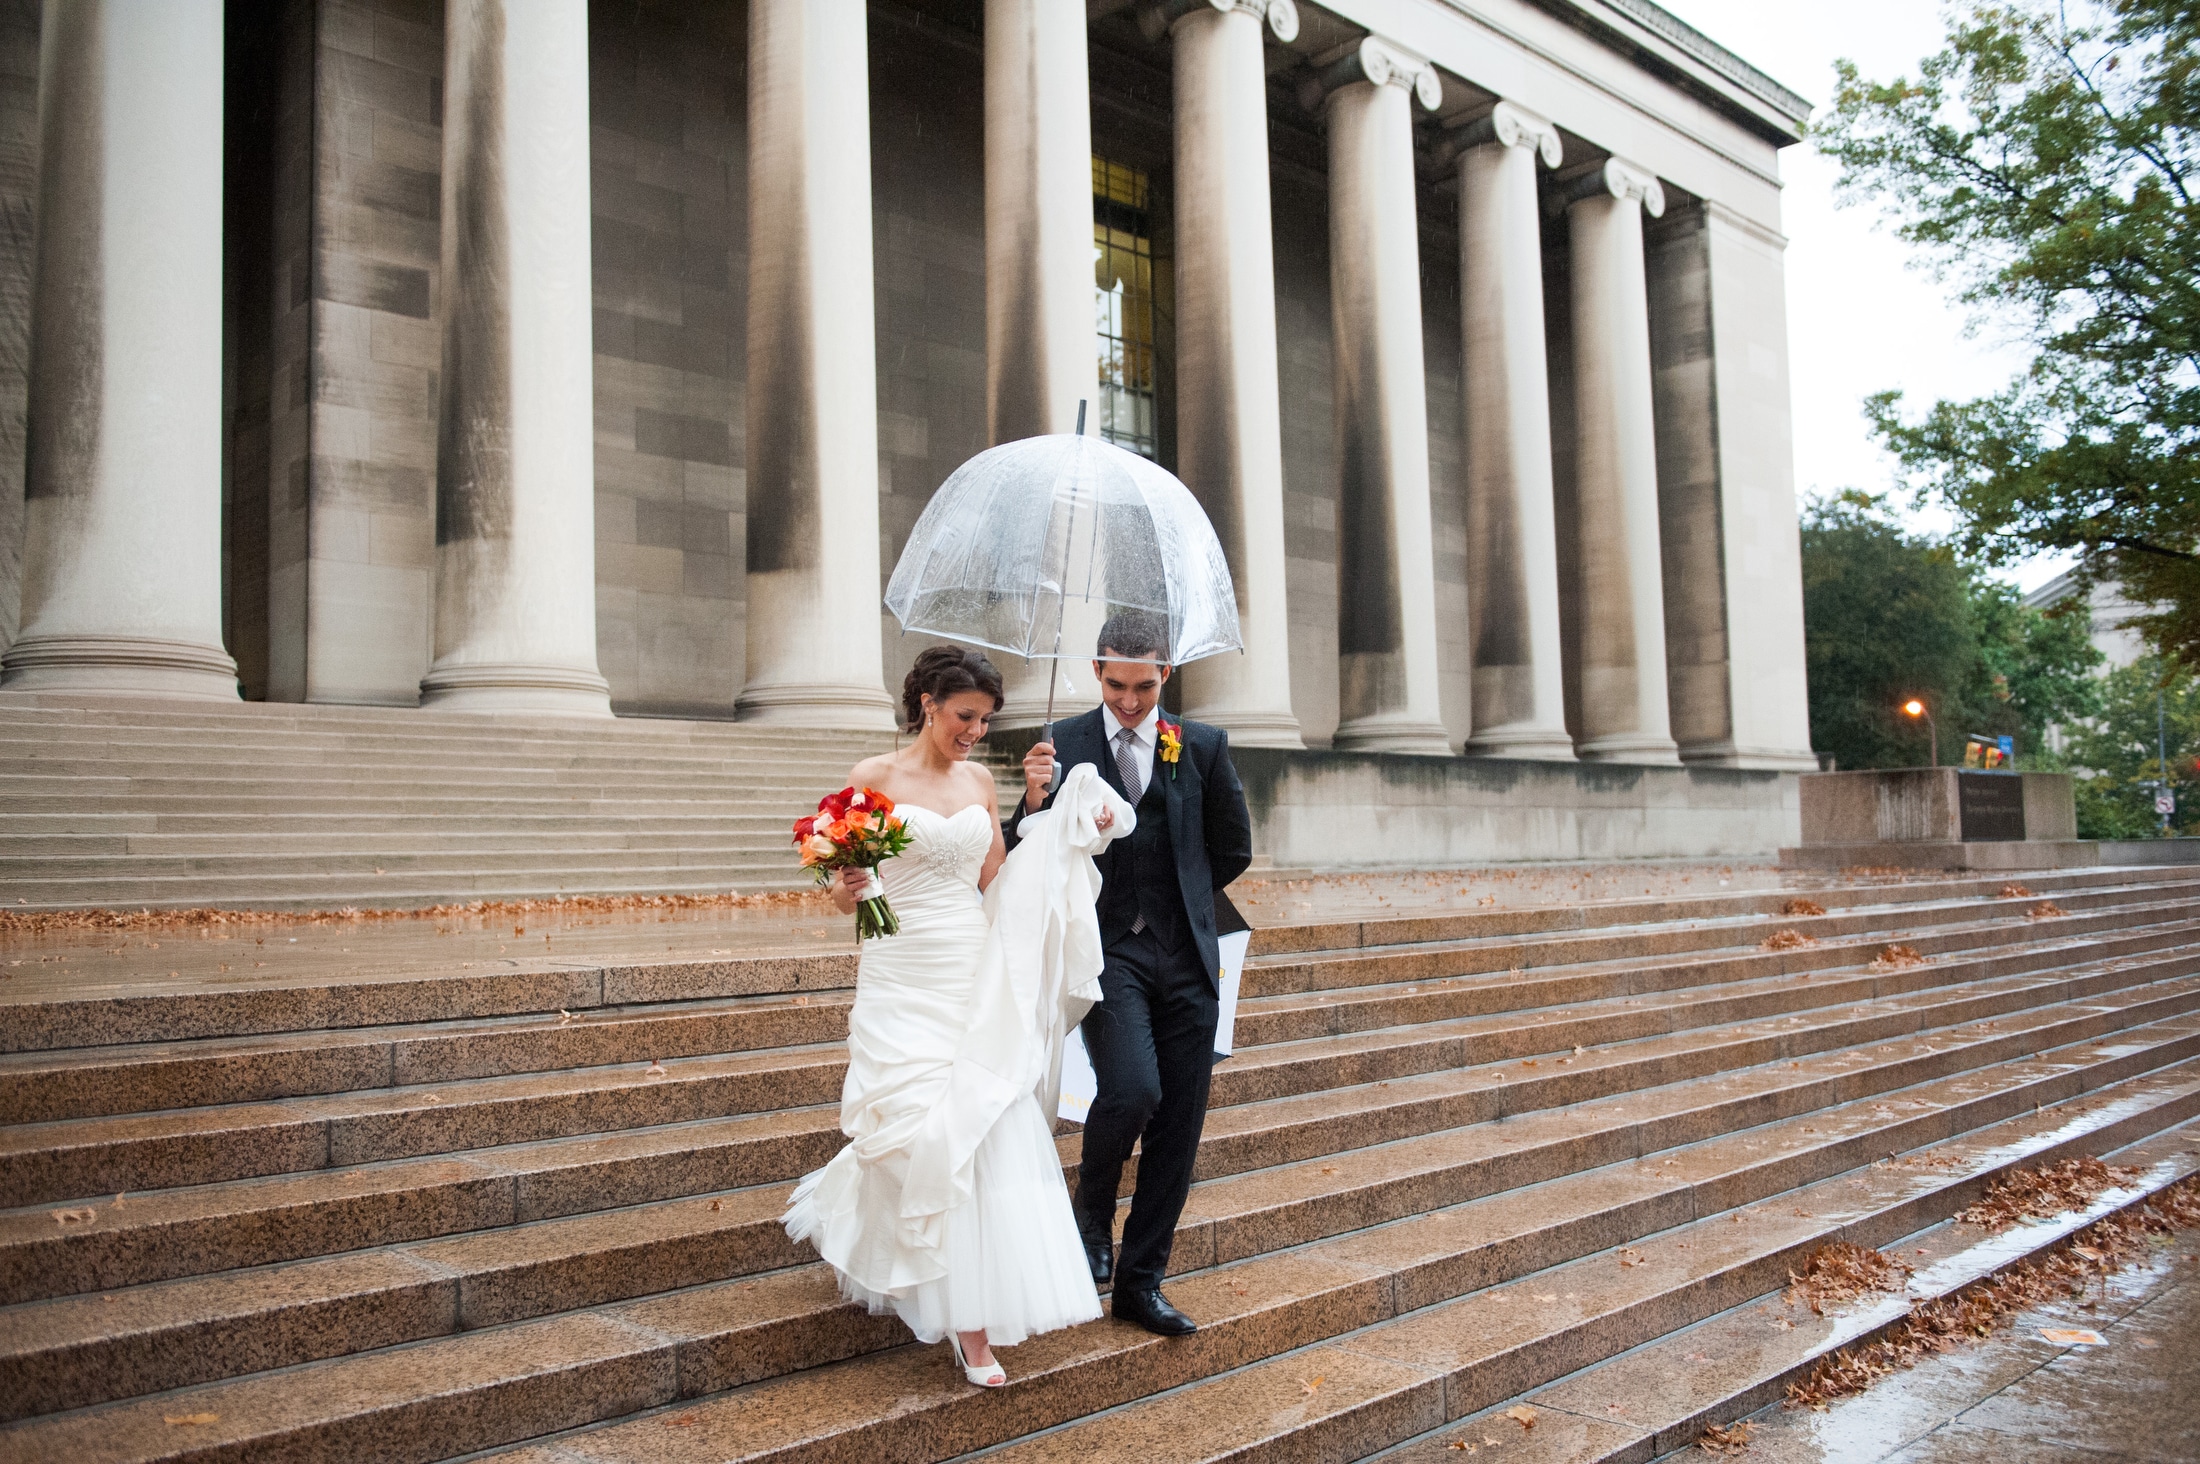 A bride and groom walk down the red granite steps in front of the Mellon Institute. She's holding a bright bouquet of flowers and he's holding a clear umbrella over them because it's raining. So we did wedding photos in the rain.